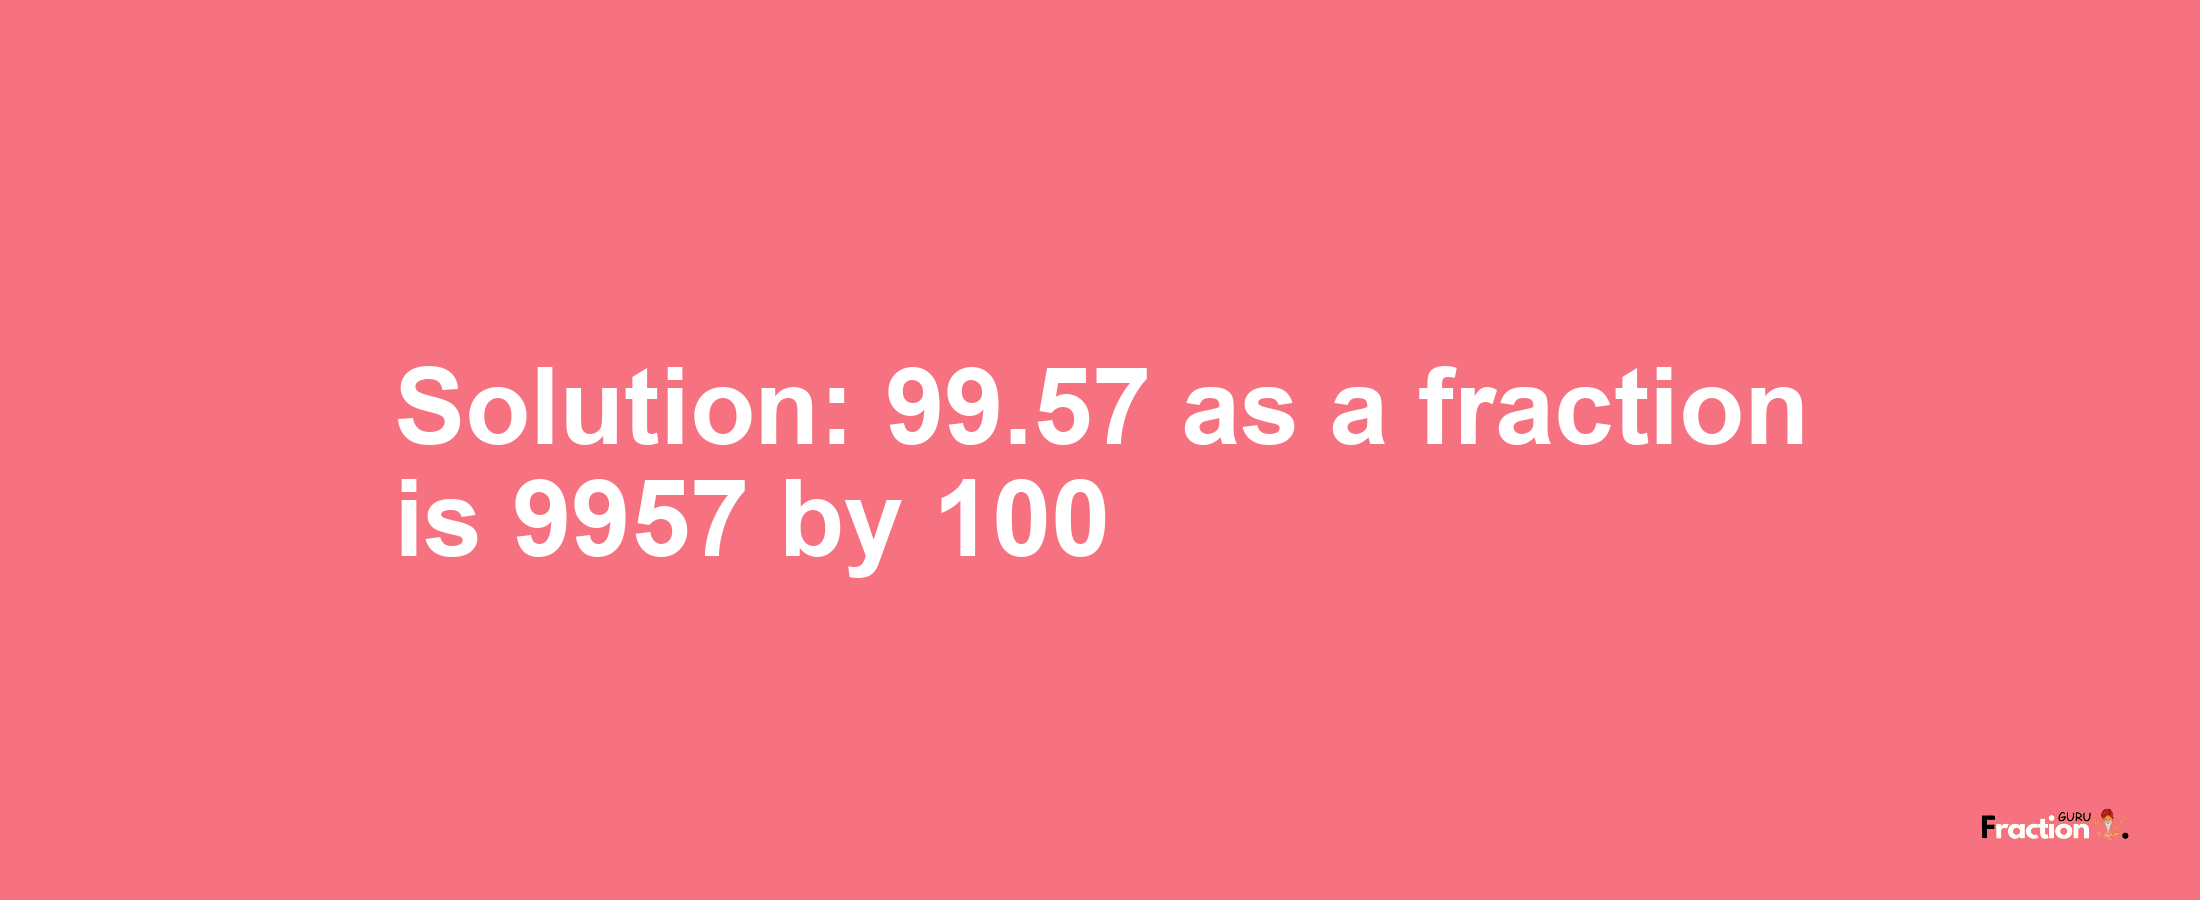 Solution:99.57 as a fraction is 9957/100